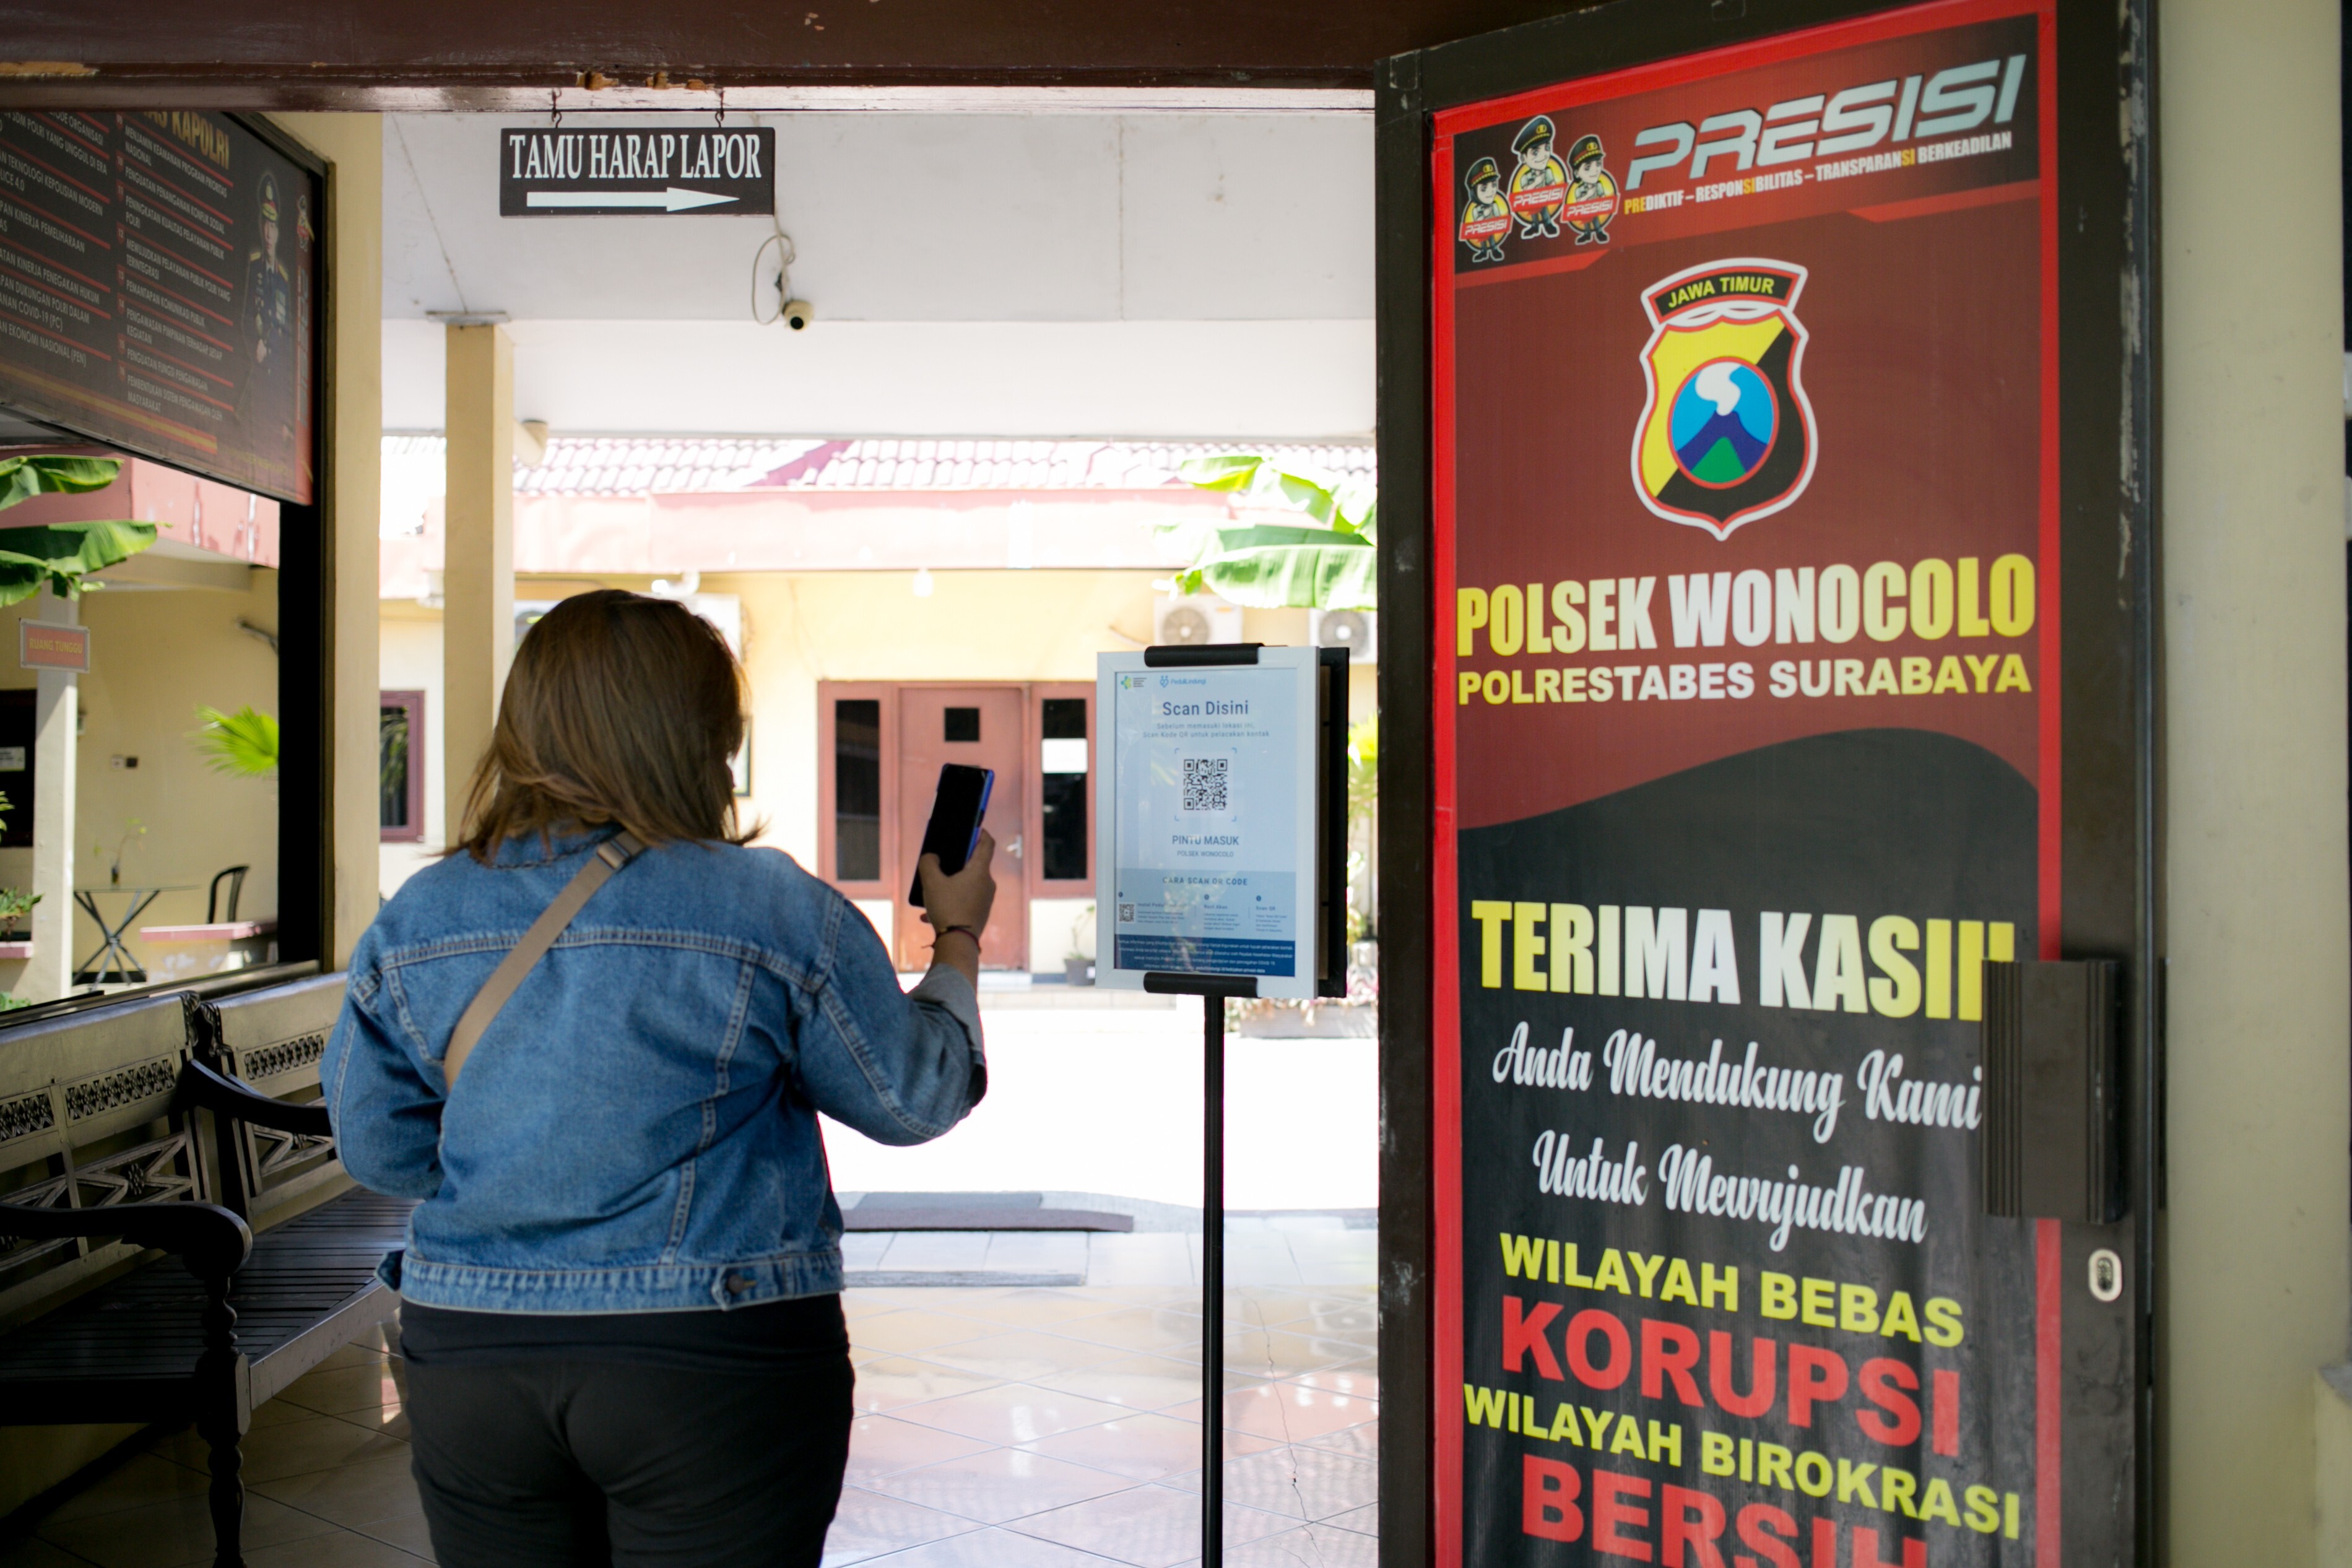 A visitor to the Wonocolo Police Station in Surabaya, Indonesia, scans their vaccine information before entering. Photo: Ivan Darski